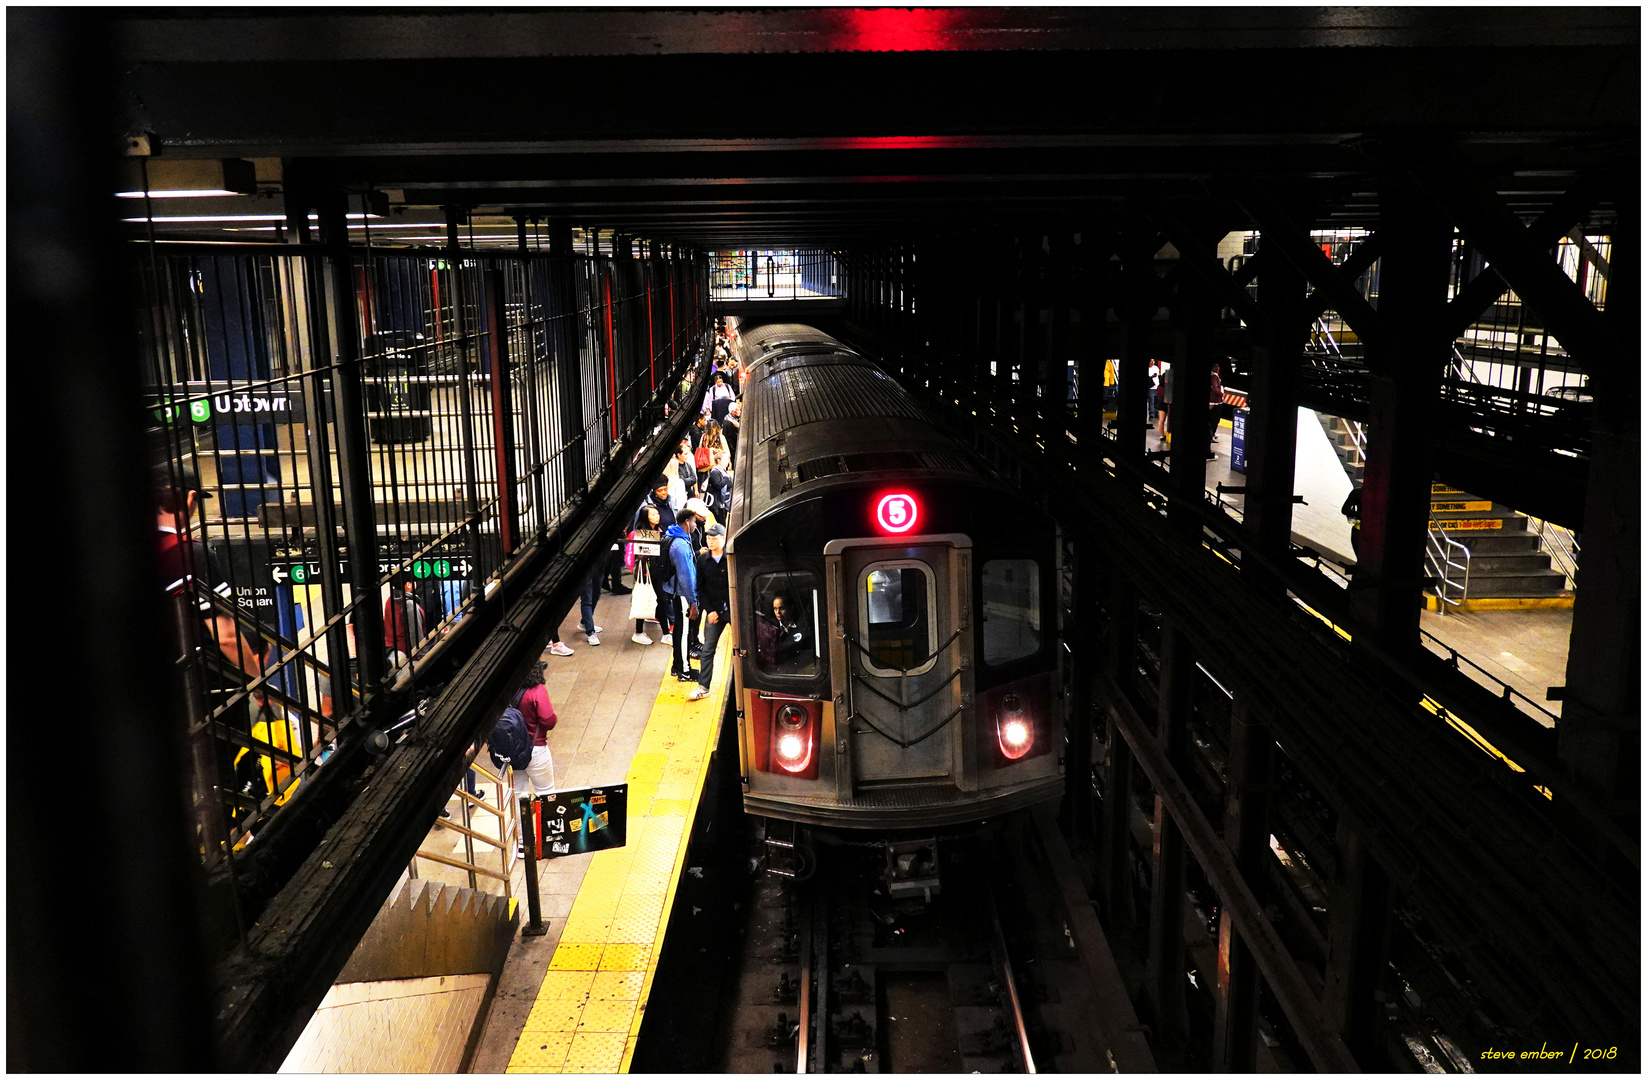 5 Train at 14th Street-Union Square Station